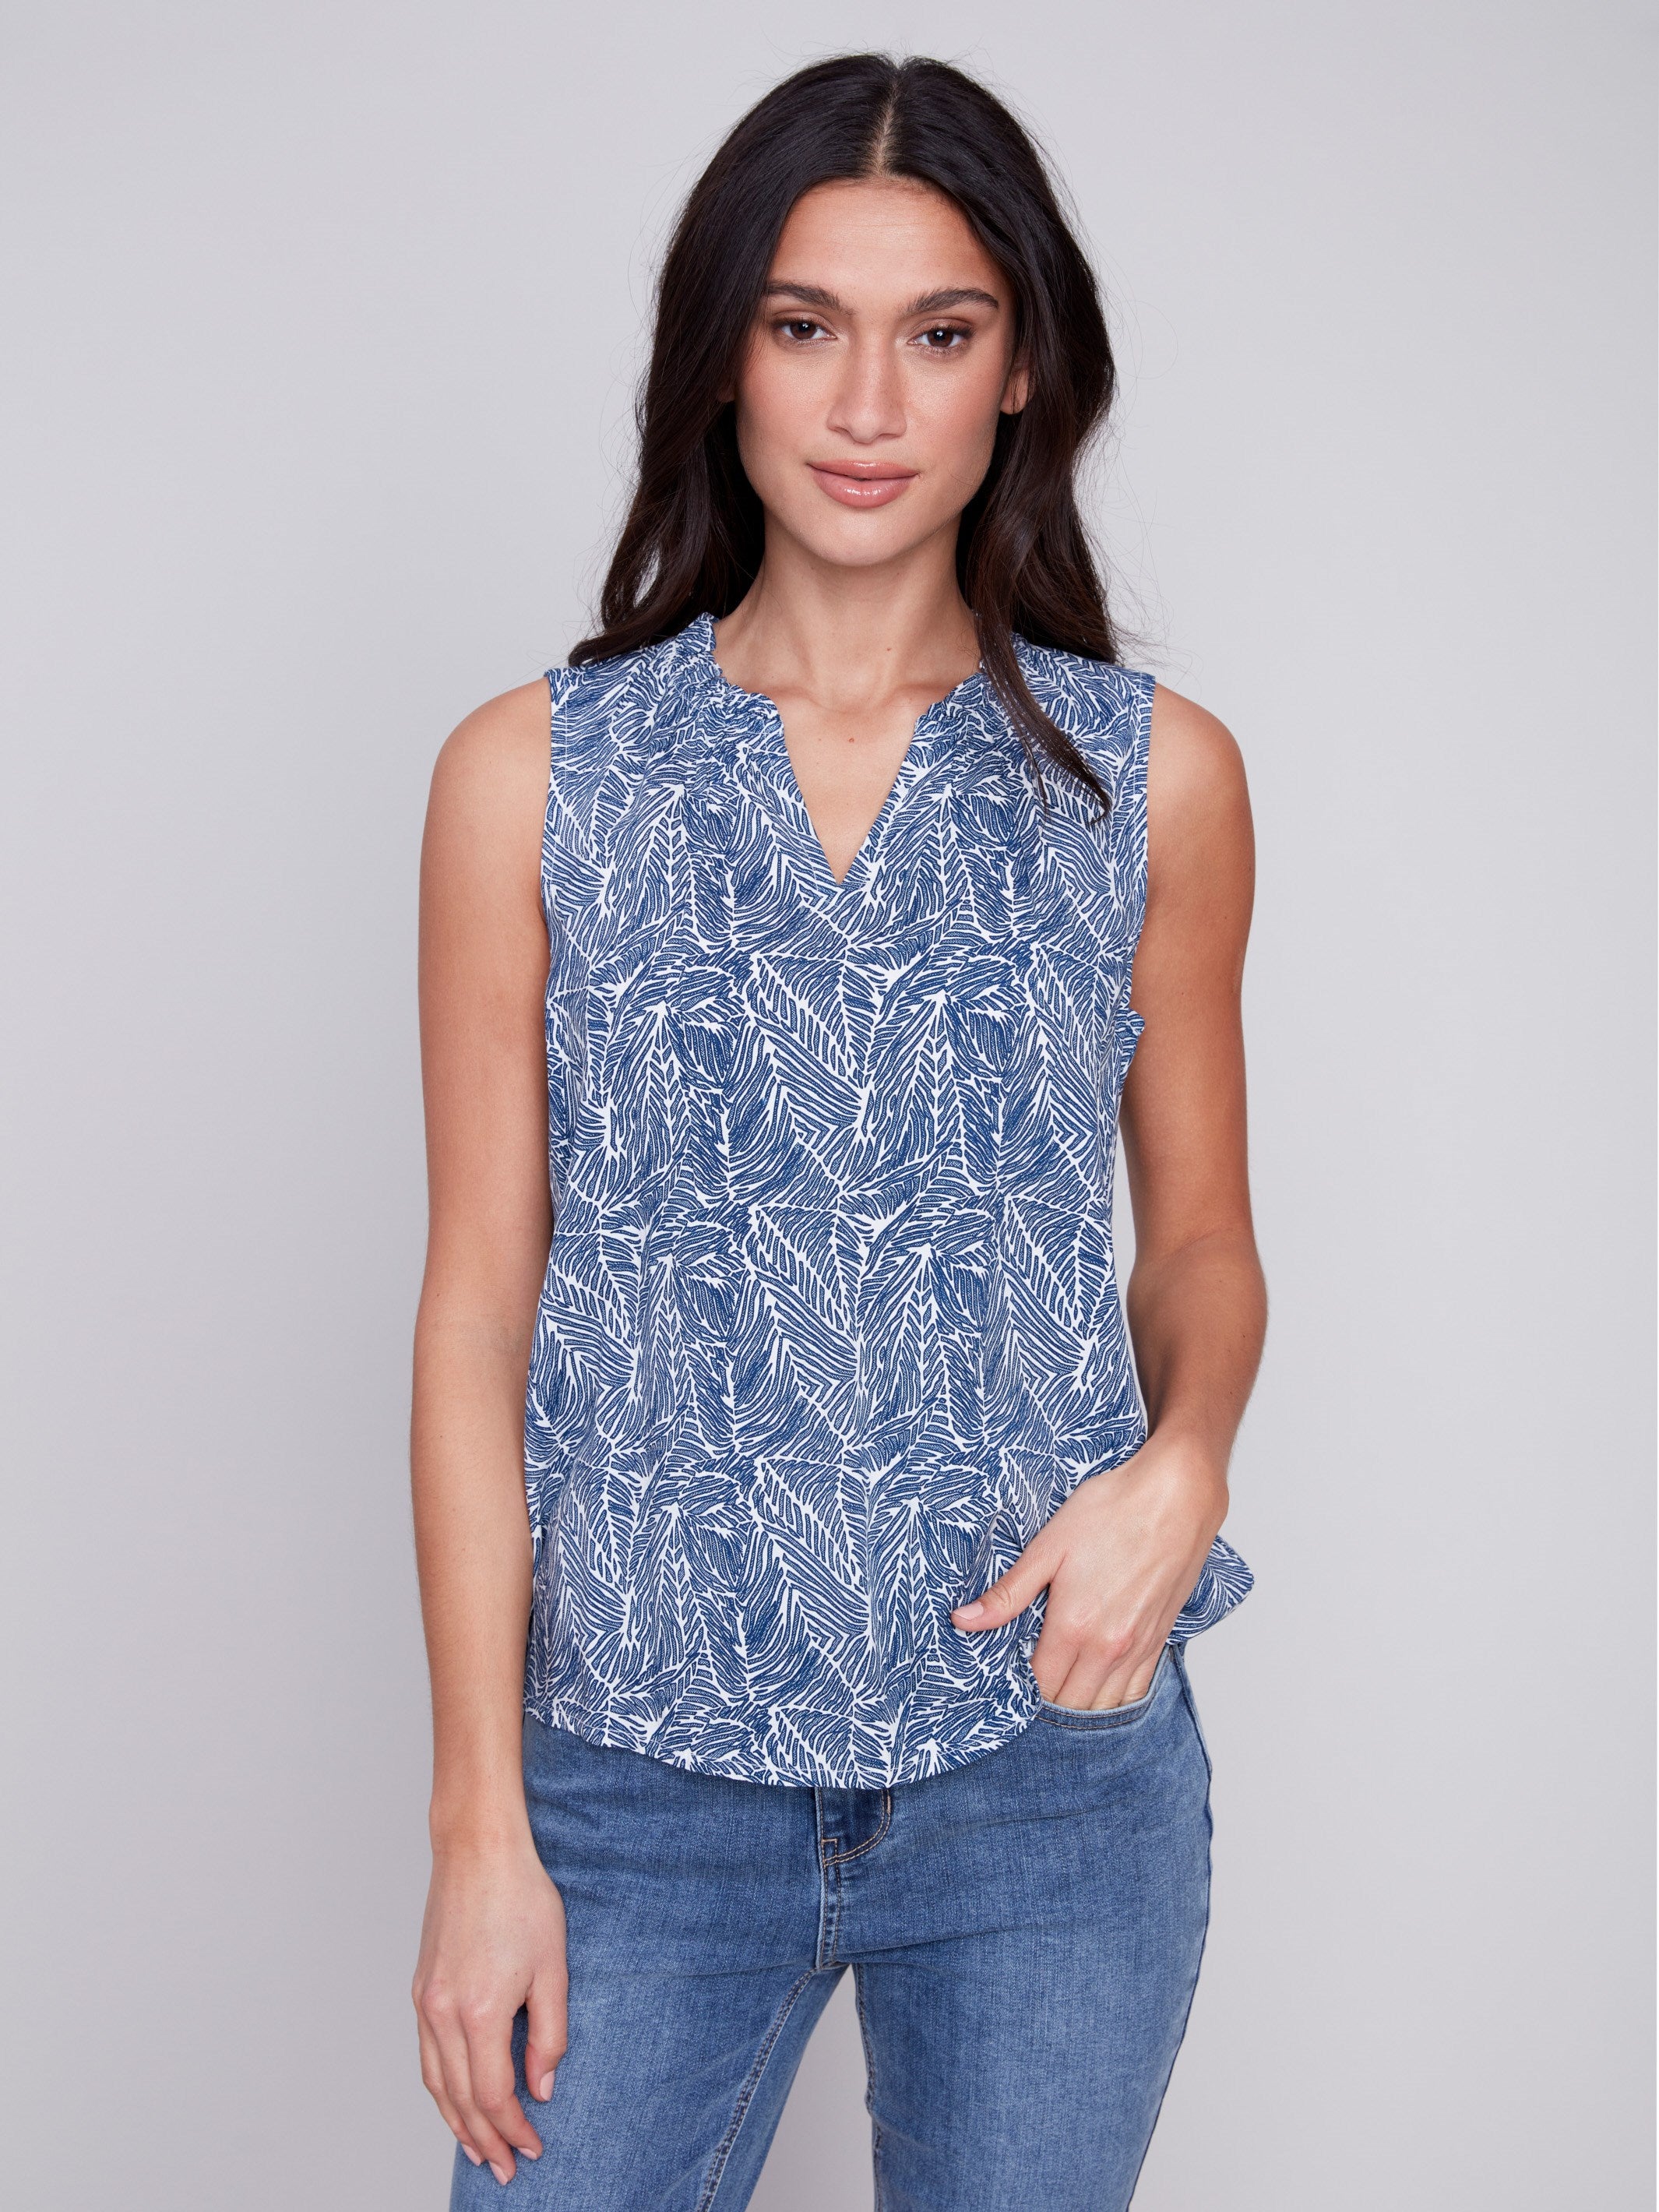 Sleeveless Printed Ruffle Neck Blouse - Petals - Charlie B Collection Canada - Image 1